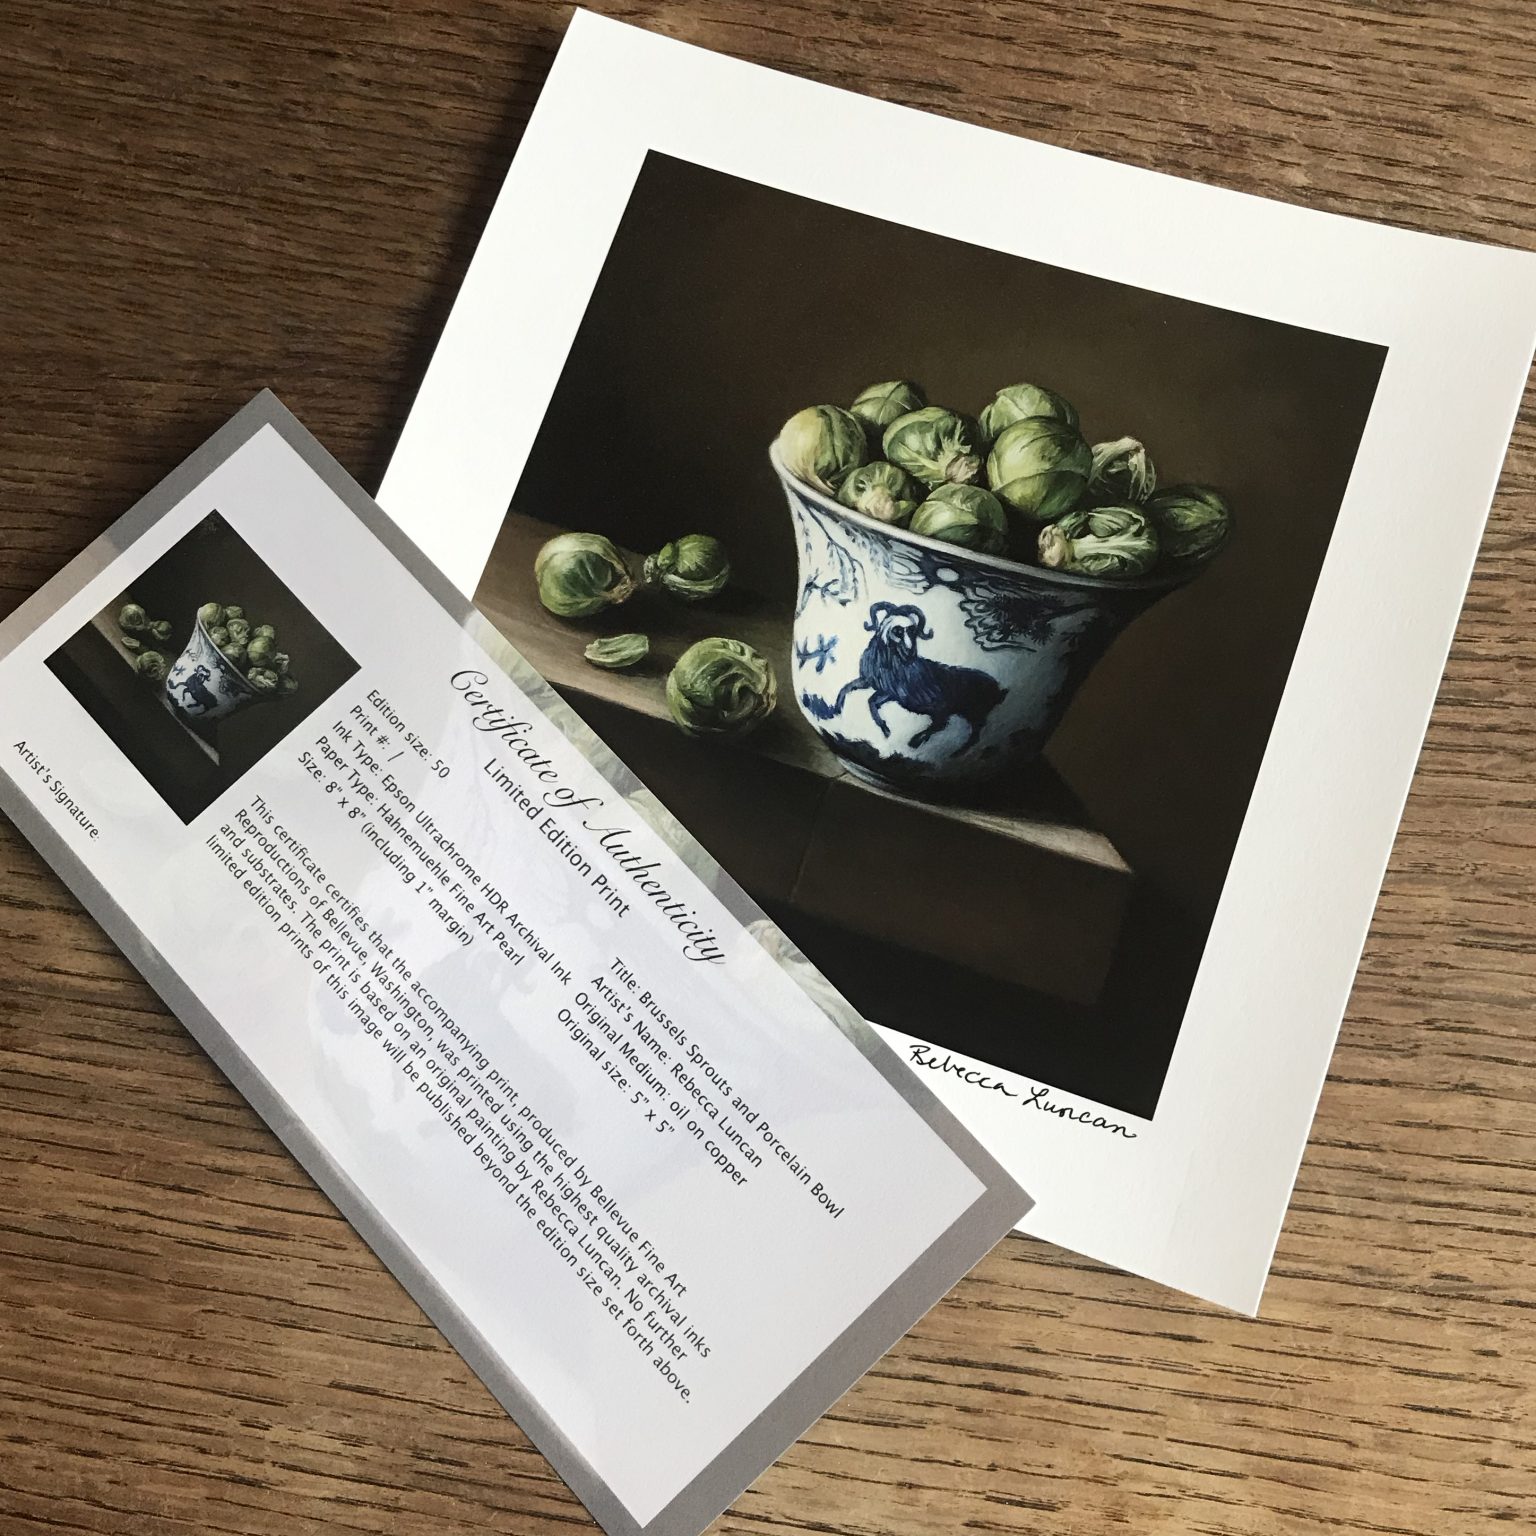 Brussels Sprouts and Porcelain Bowl limited edition print with certificate of authenticity from still life oil painting on copper by Rebecca Luncan